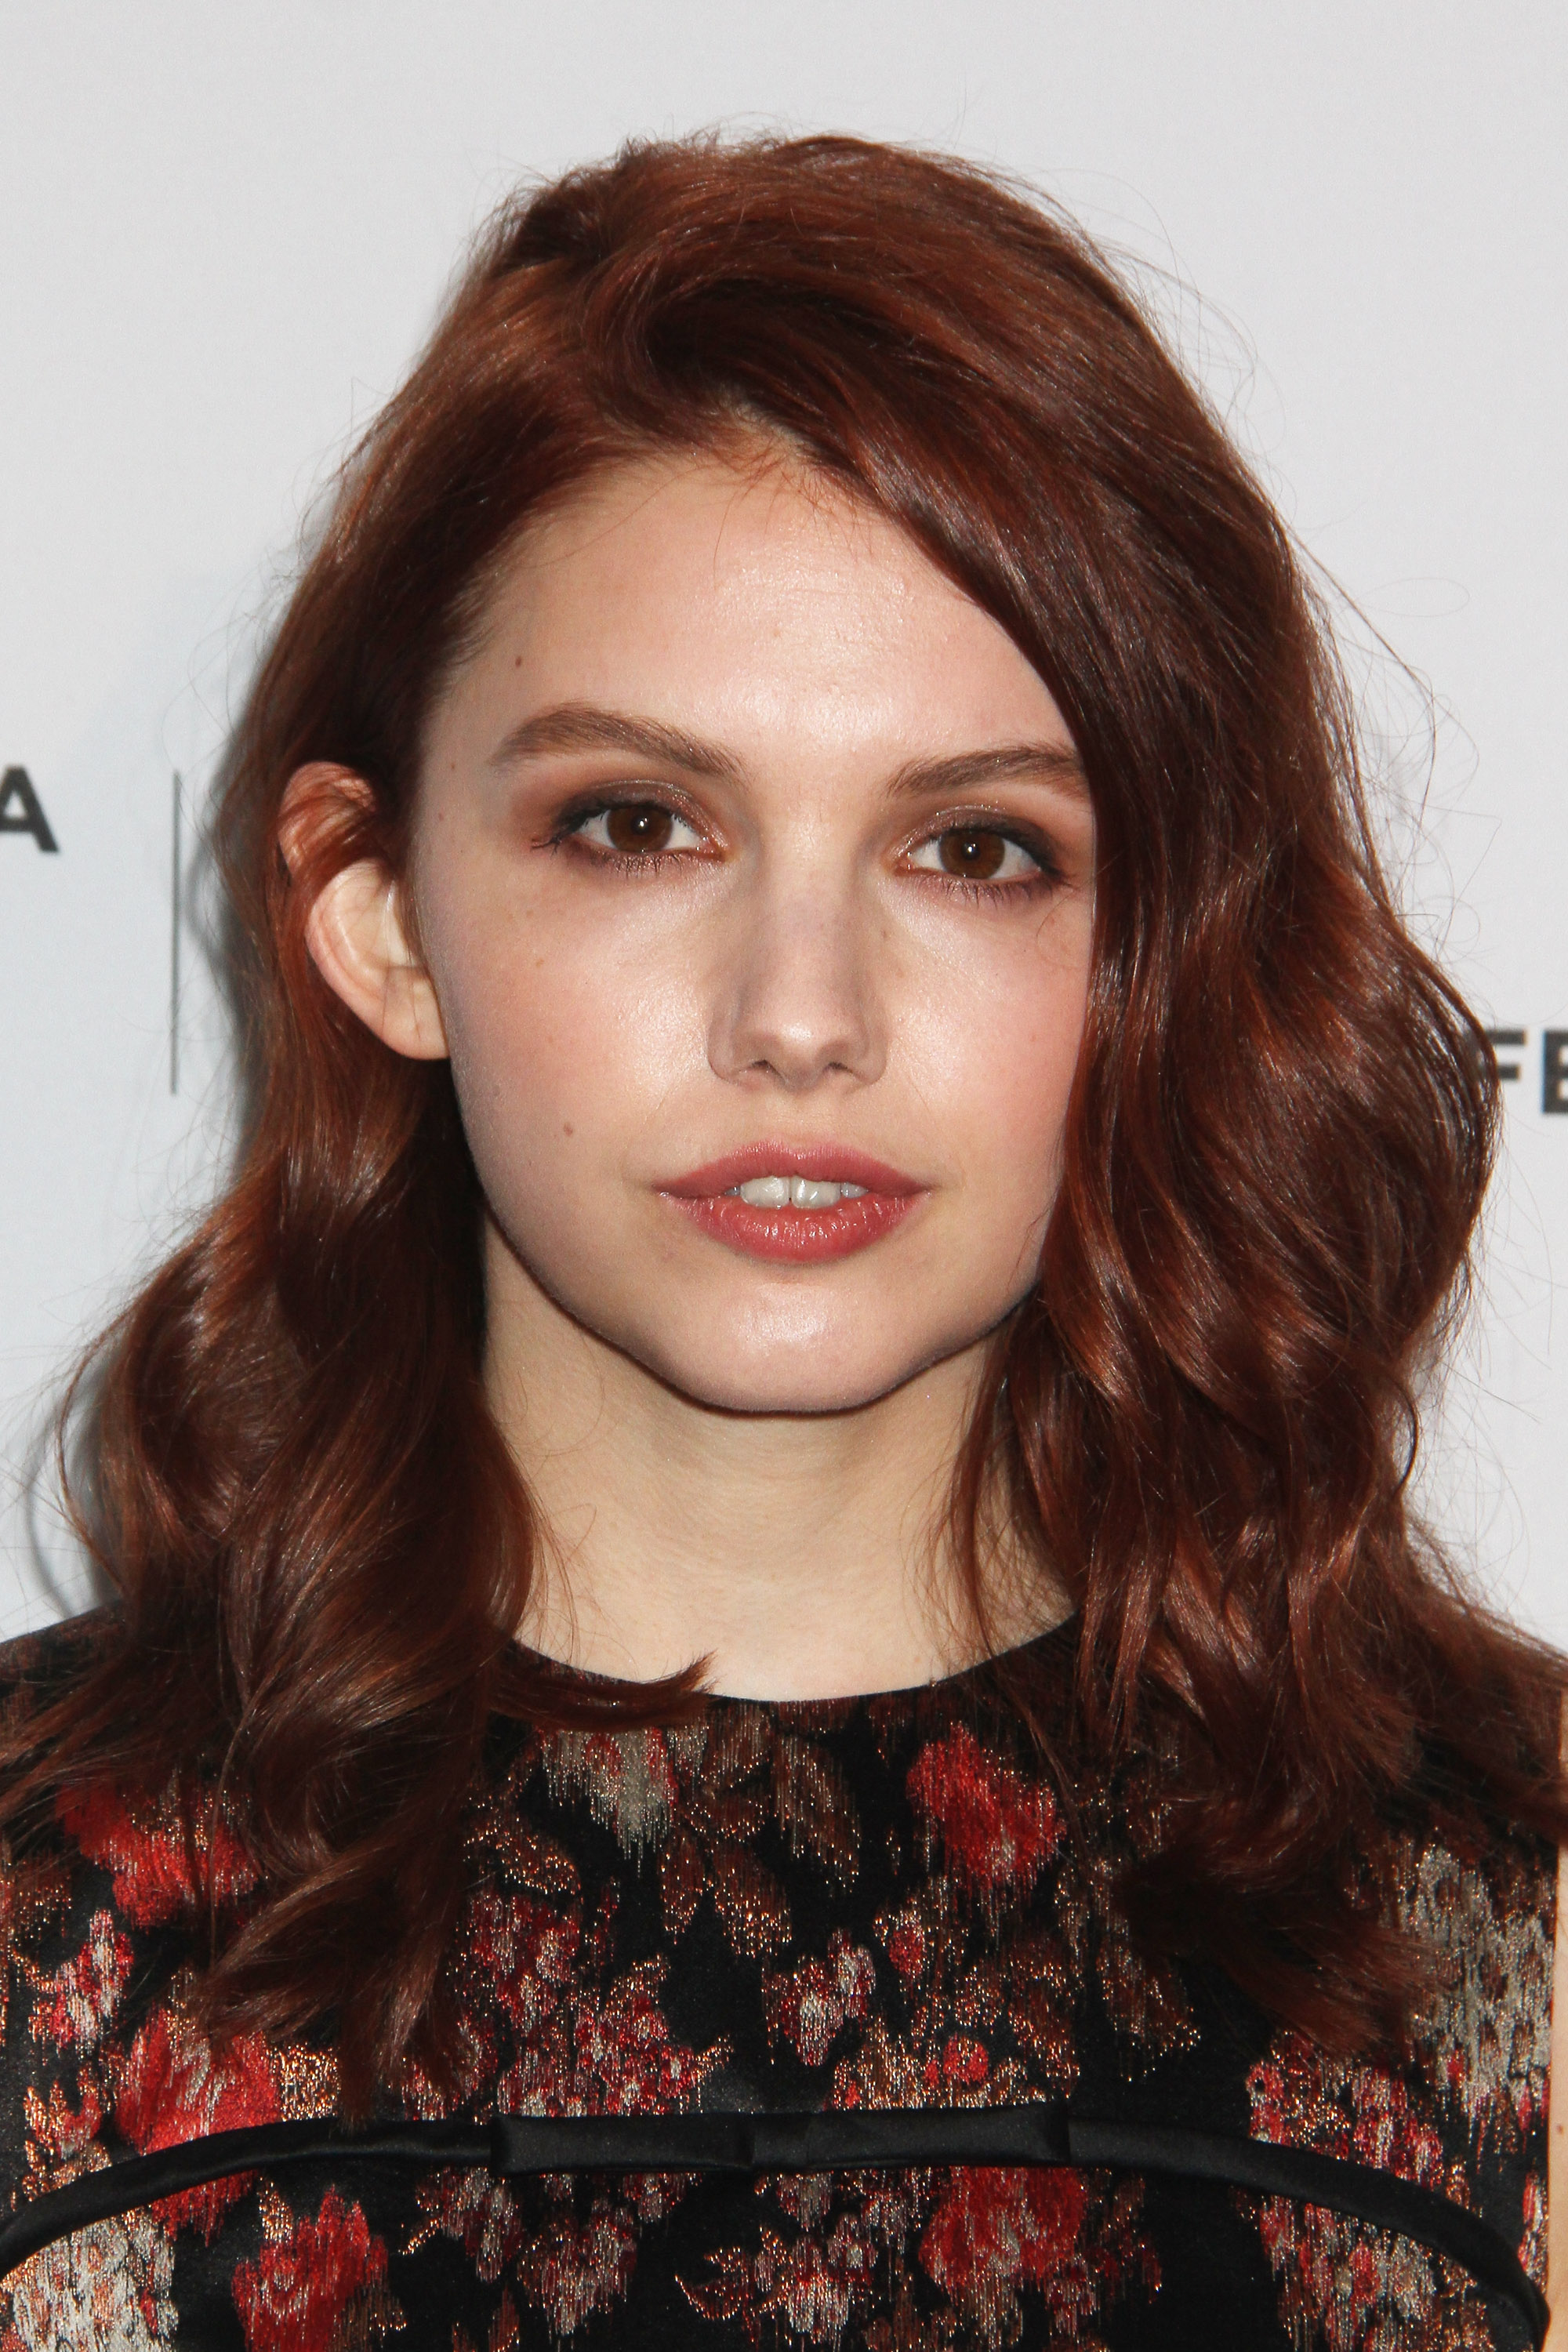 NEW YORK, NY - APRIL 16:  Actress Hannah Murray attends the premiere of "Bridgend" during the 2015 Tribeca Film Festival at Chelsea Bow Tie Cinemas on April 16, 2015 in New York City.  (Photo by Laura Cavanaugh/Getty Images for the 2015 Tribeca Film Festival) (Laura Cavanaugh&mdash;2015 Getty Images)